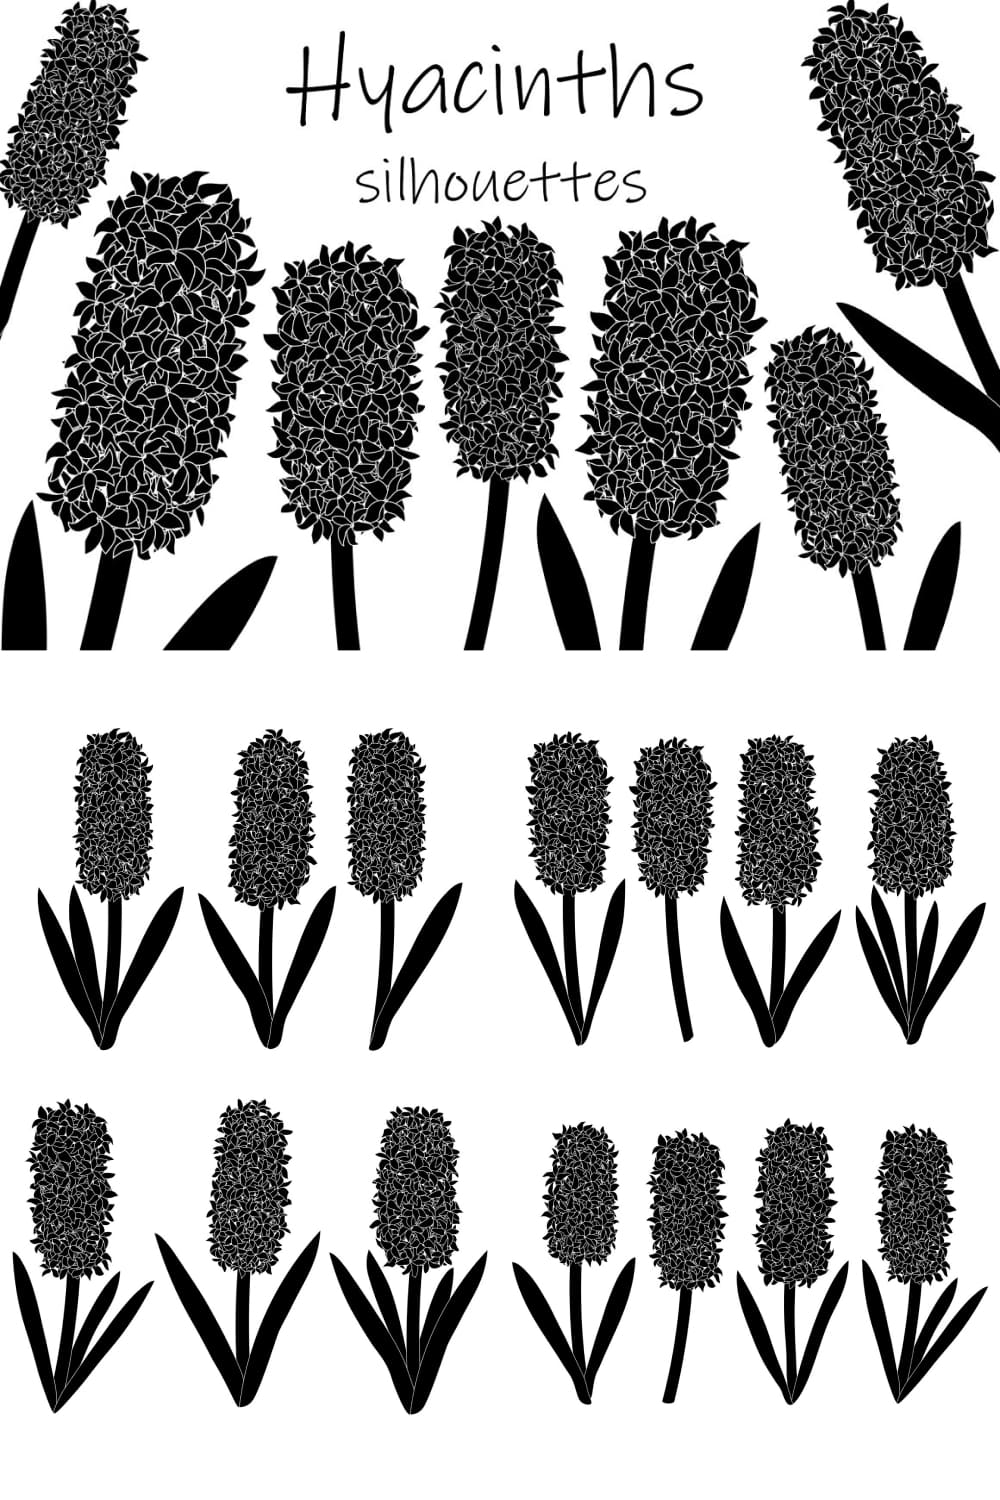 Hyacinths Flowers Silhouettes Vector pinterest image.